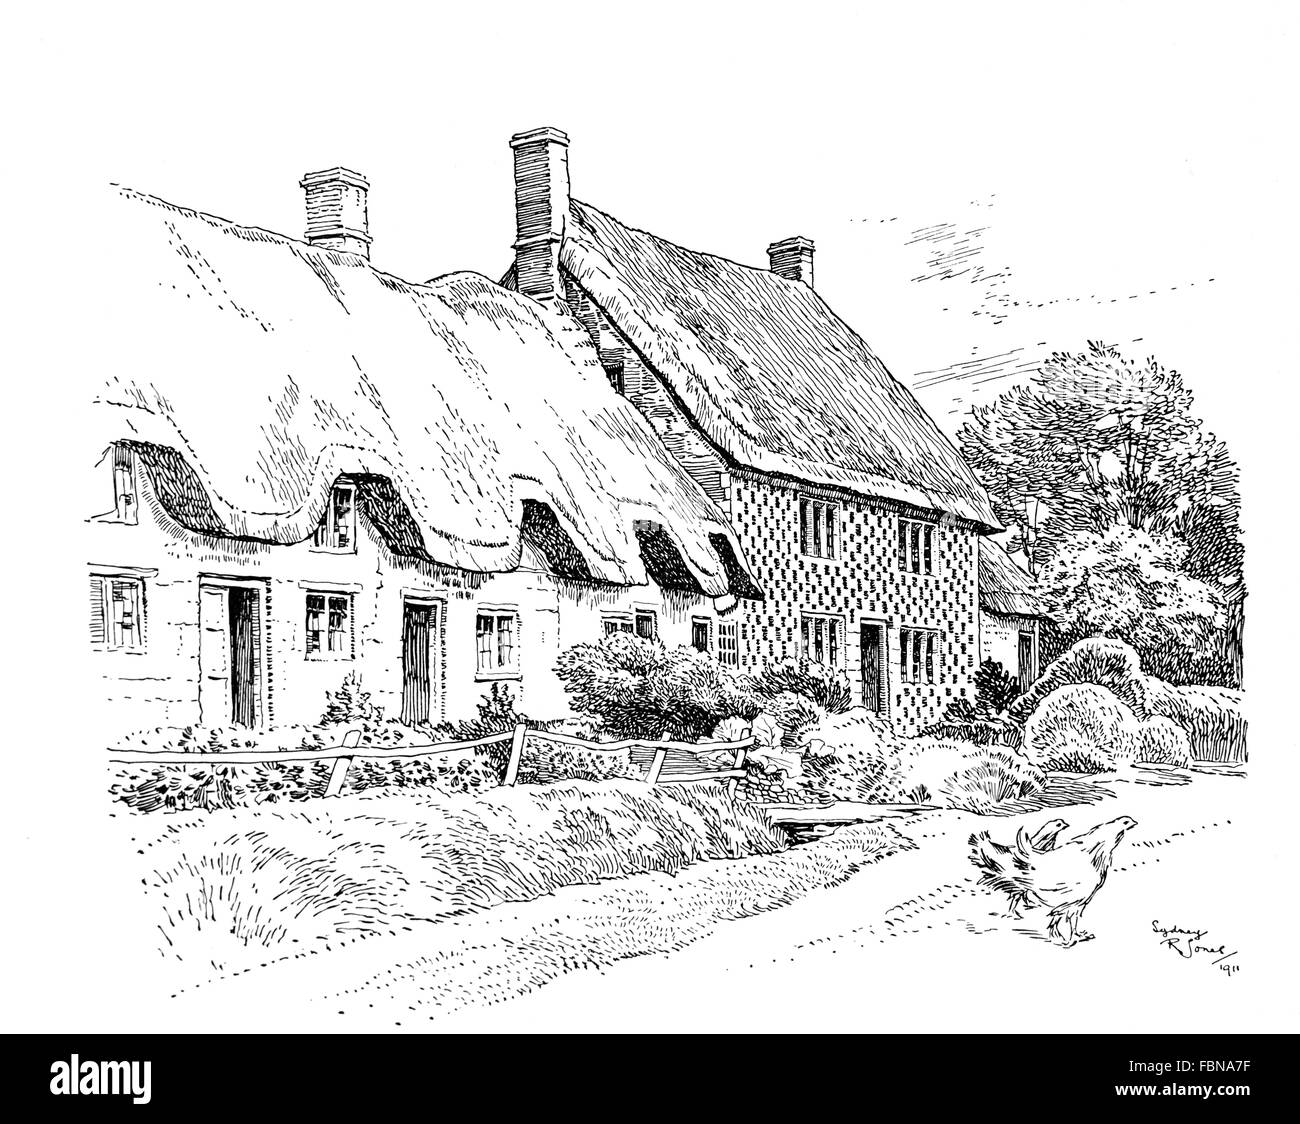 UK, England, Wiltshire, Wylfe village, old thatched cottages and farmhouse, 1911 line illustration by Sydney R Jones Stock Photo